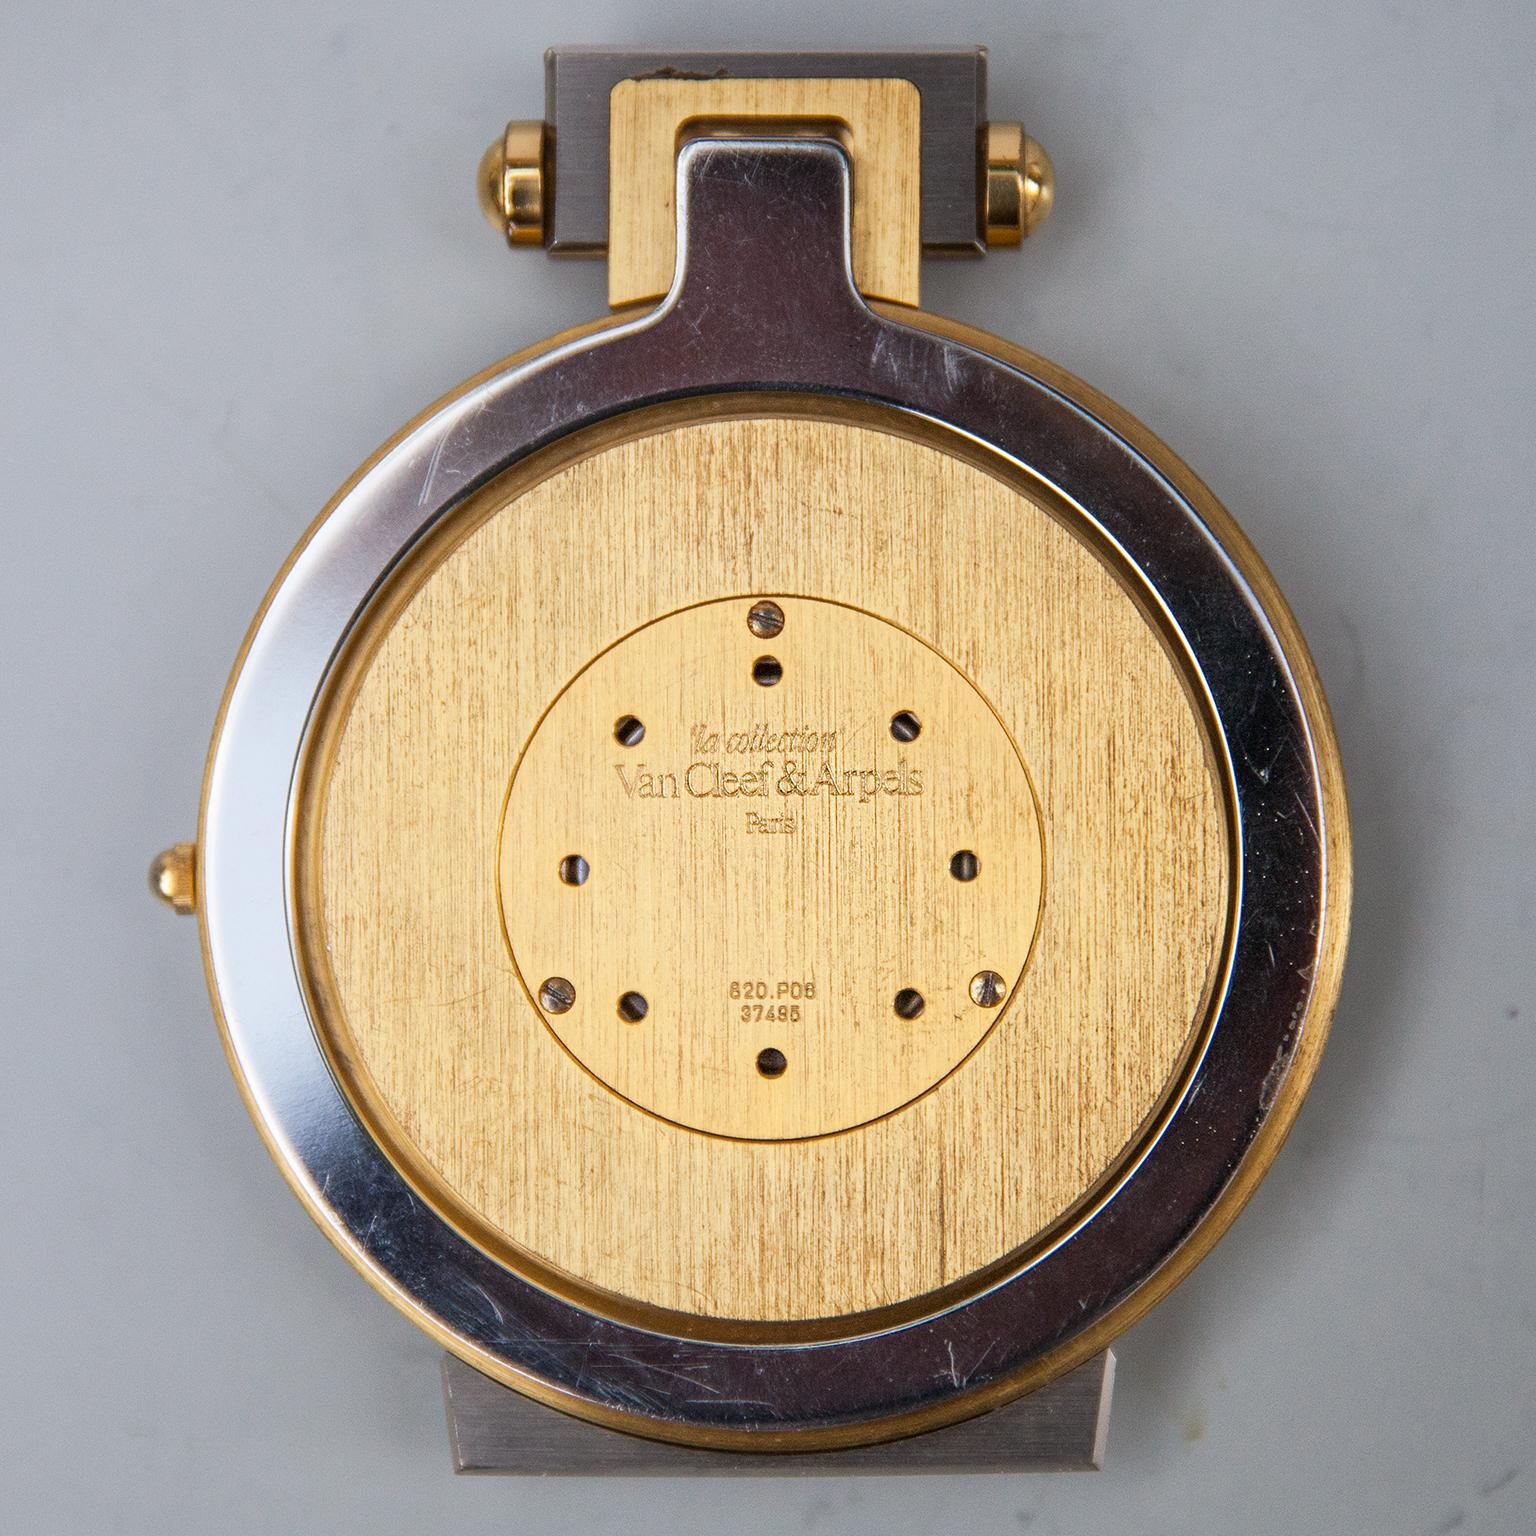 French Van Cleef And Arpels La Collection Travel Clock 1990s